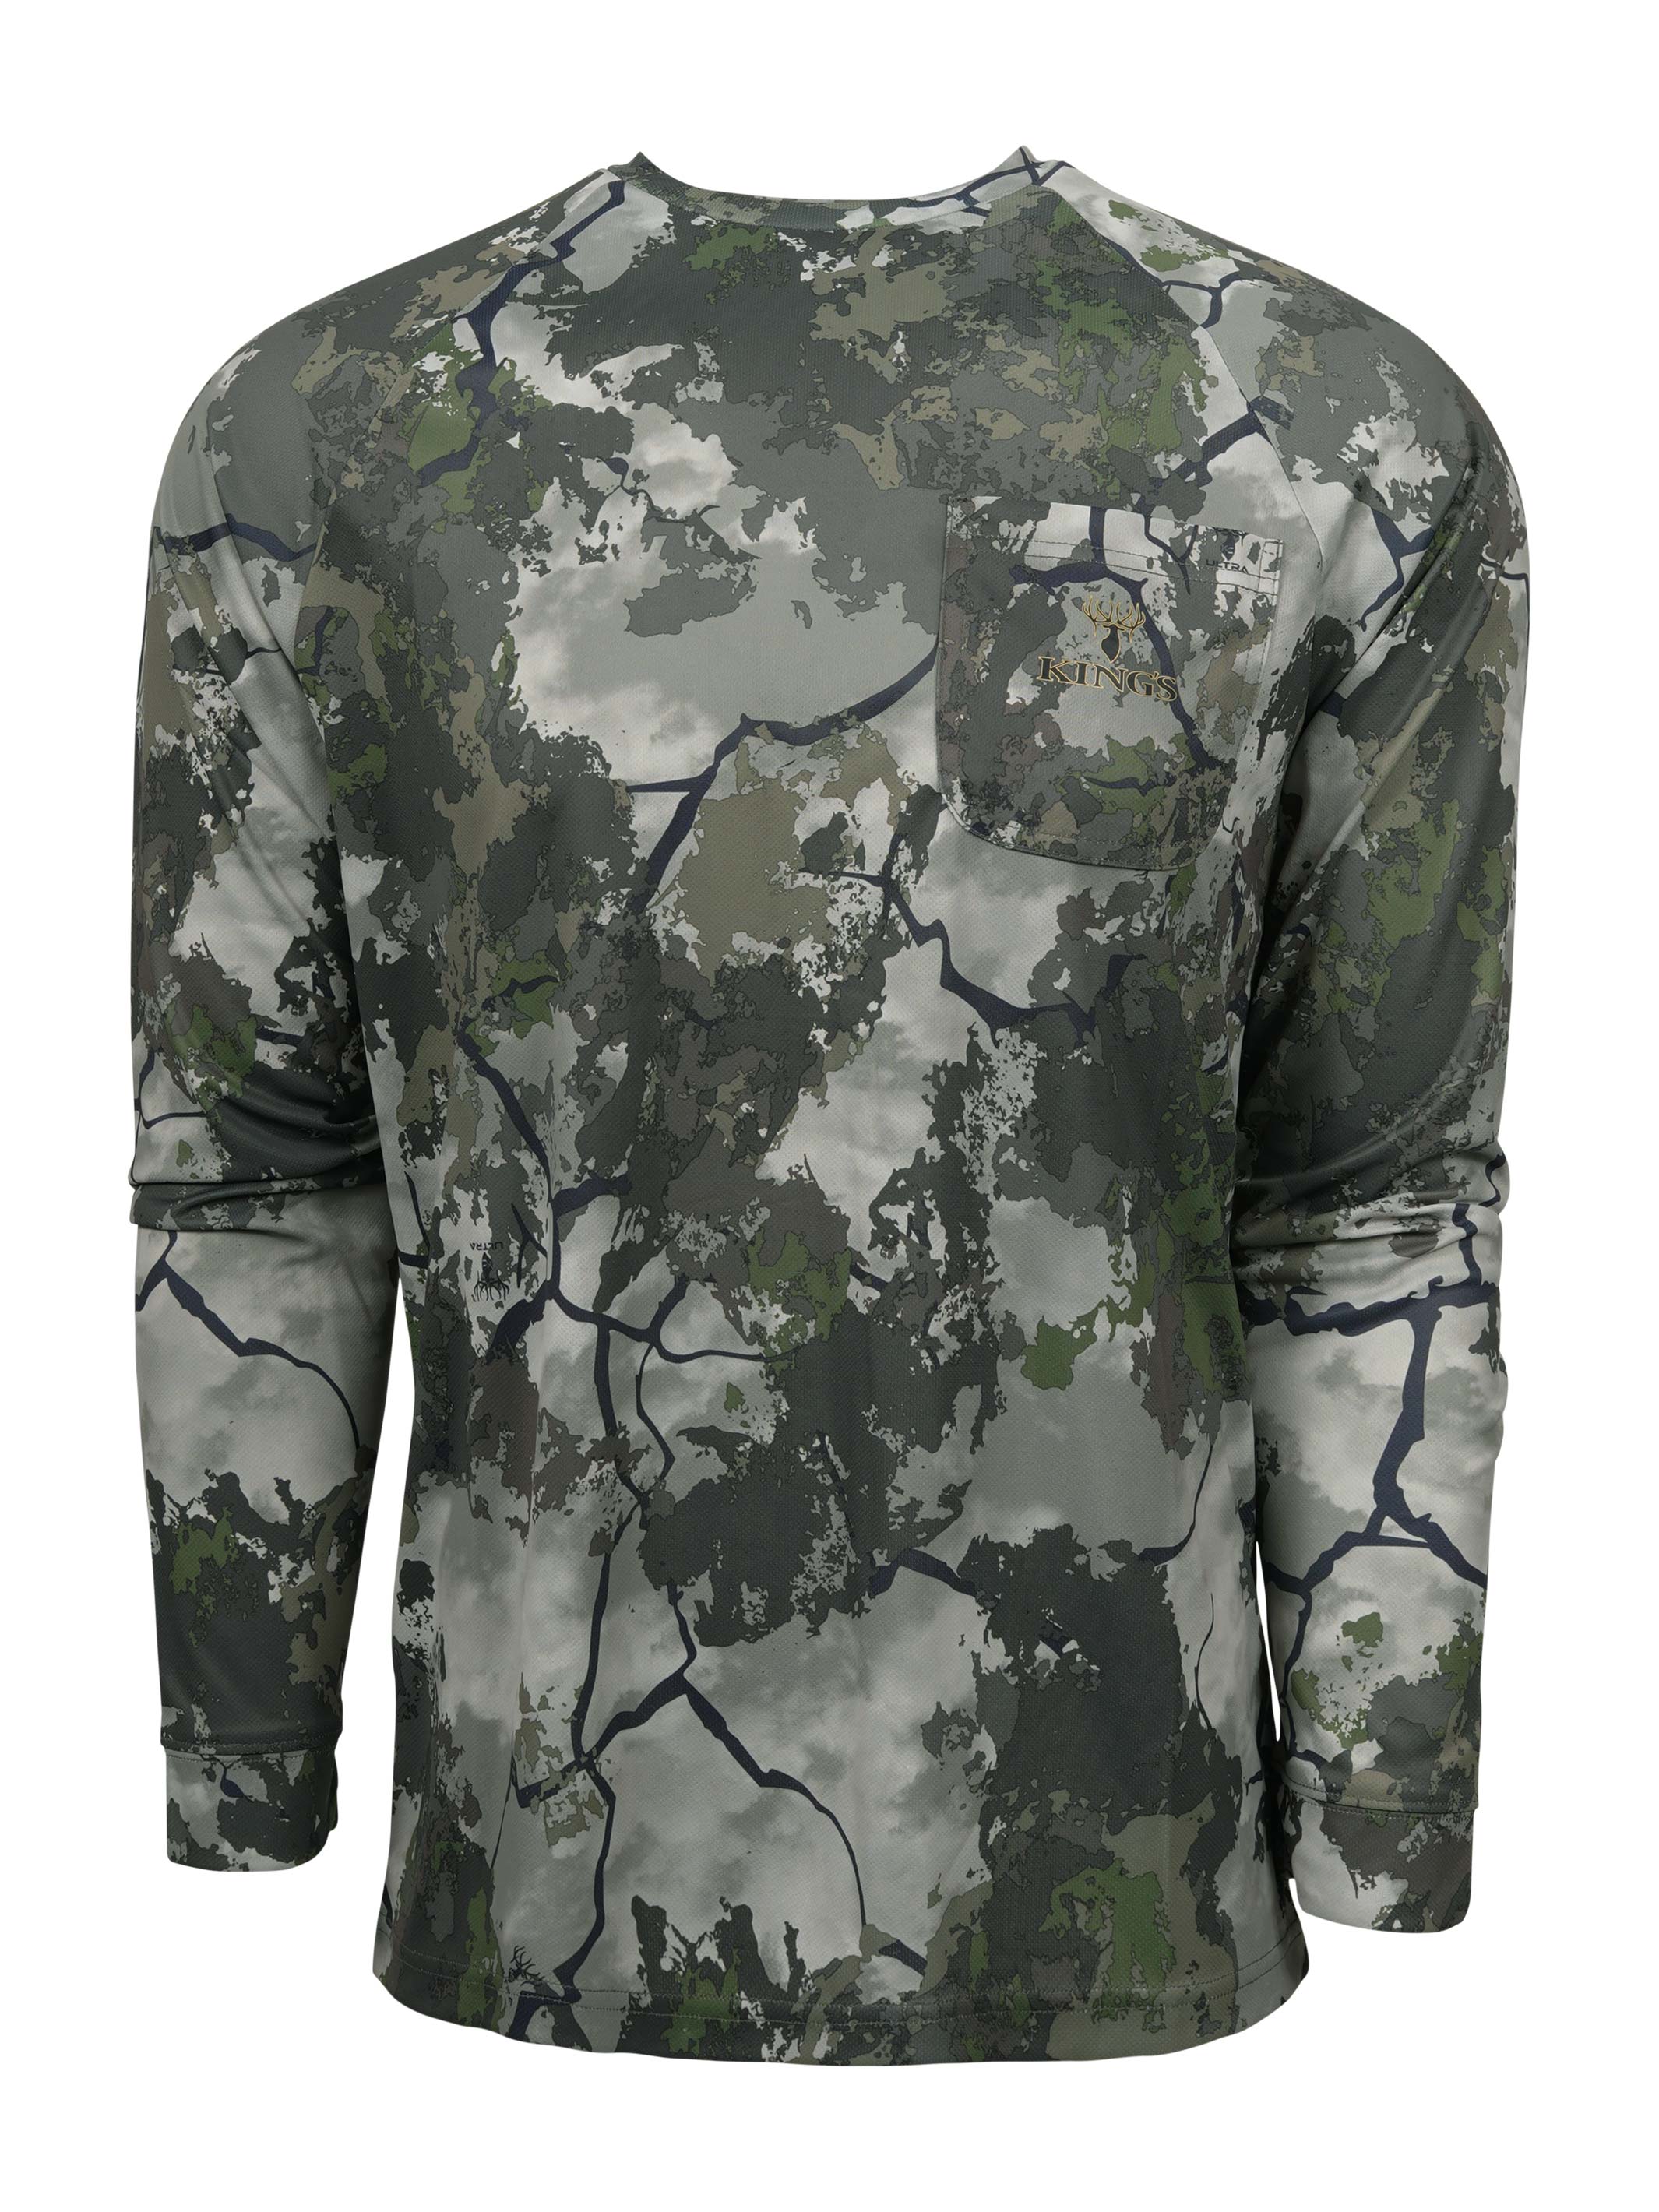 NATURAL GEAR - SHORT SLEEVED T-SHIRT - CAMO - SUMMER CAMOUFLAGE HUNTING GEAR